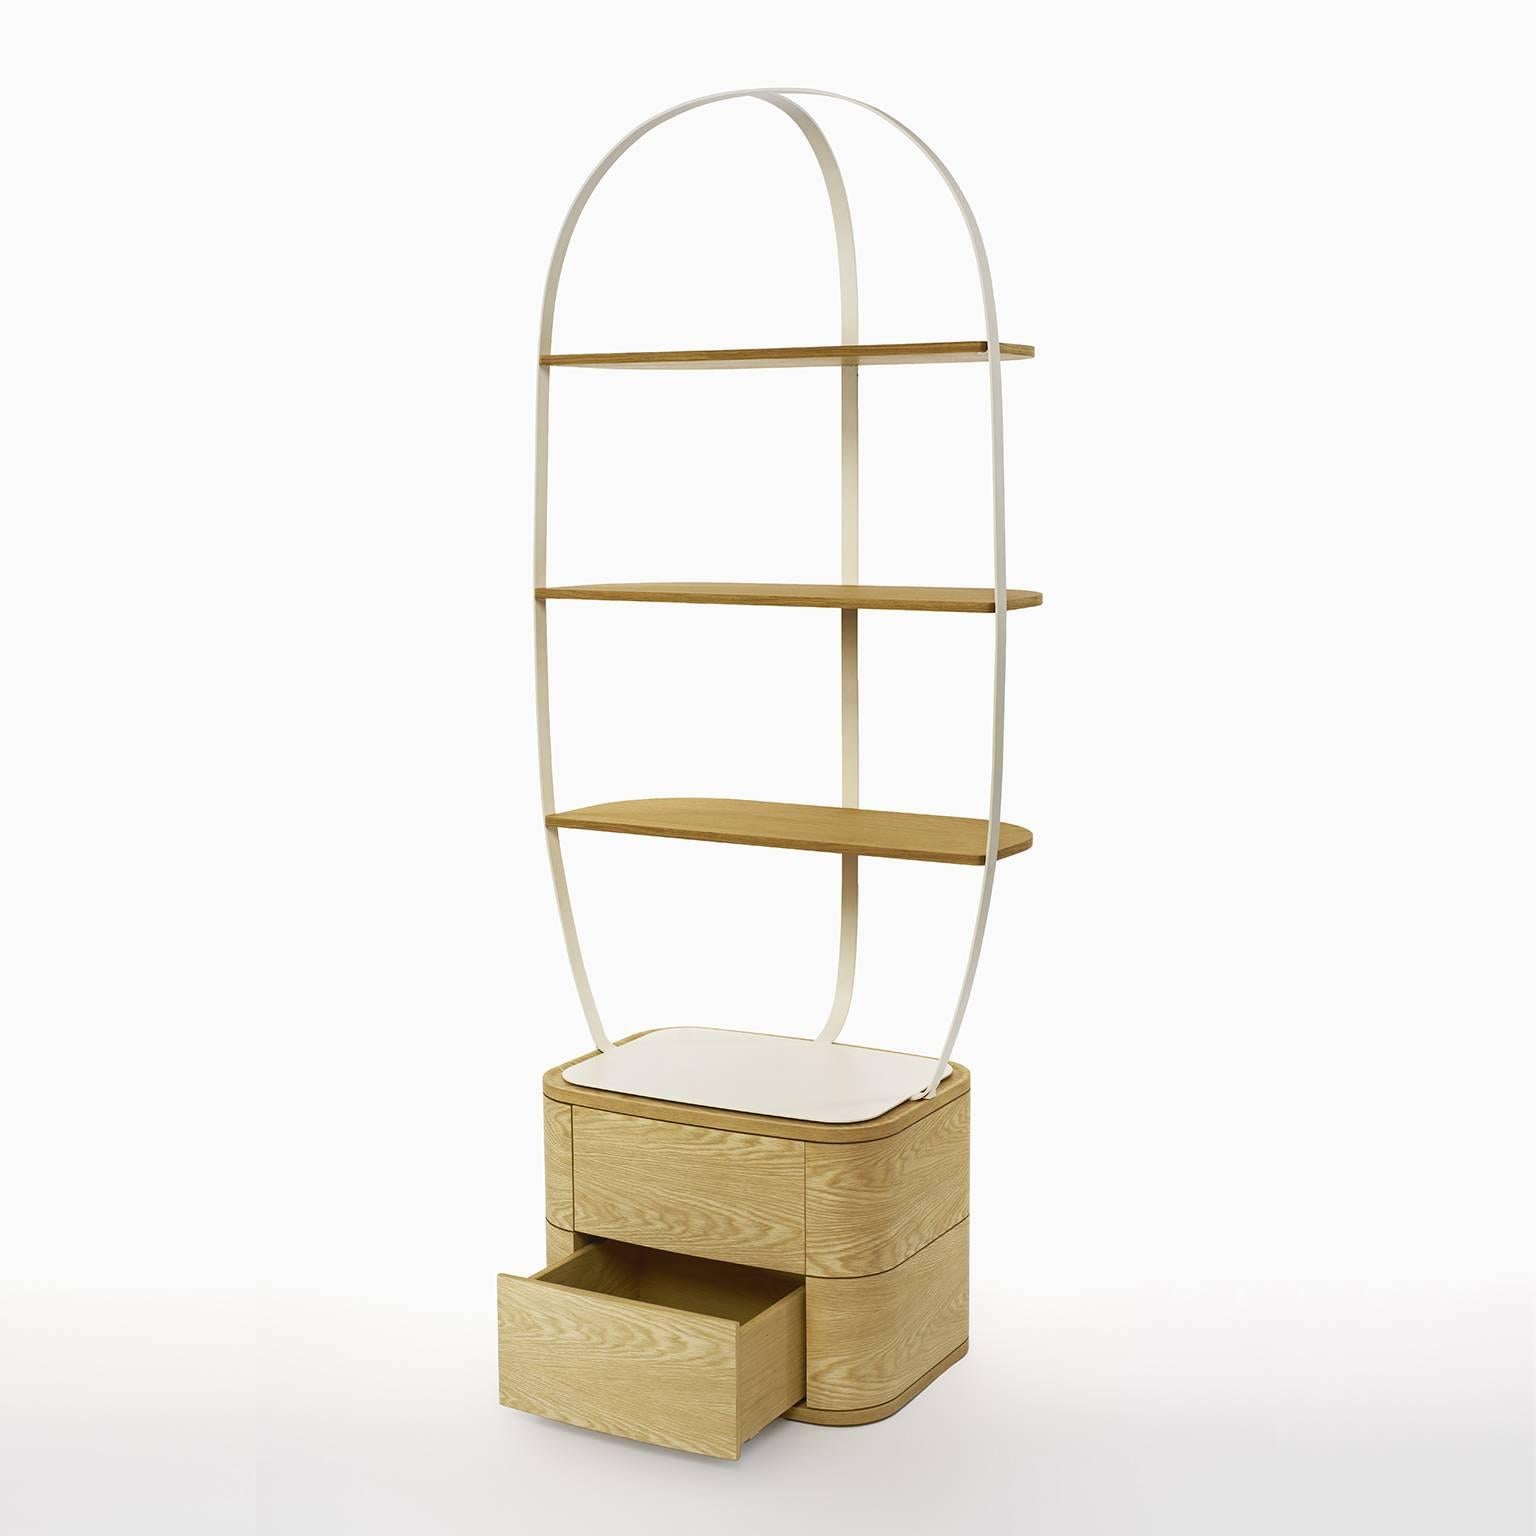 Here the bookcase Klec in the small version in white lacquered metal and oak, a truly contemporary and generous wood, known for its high strength. A bookcase with rounded shapes playing with the contrast of wood and metal, of its lightweight,